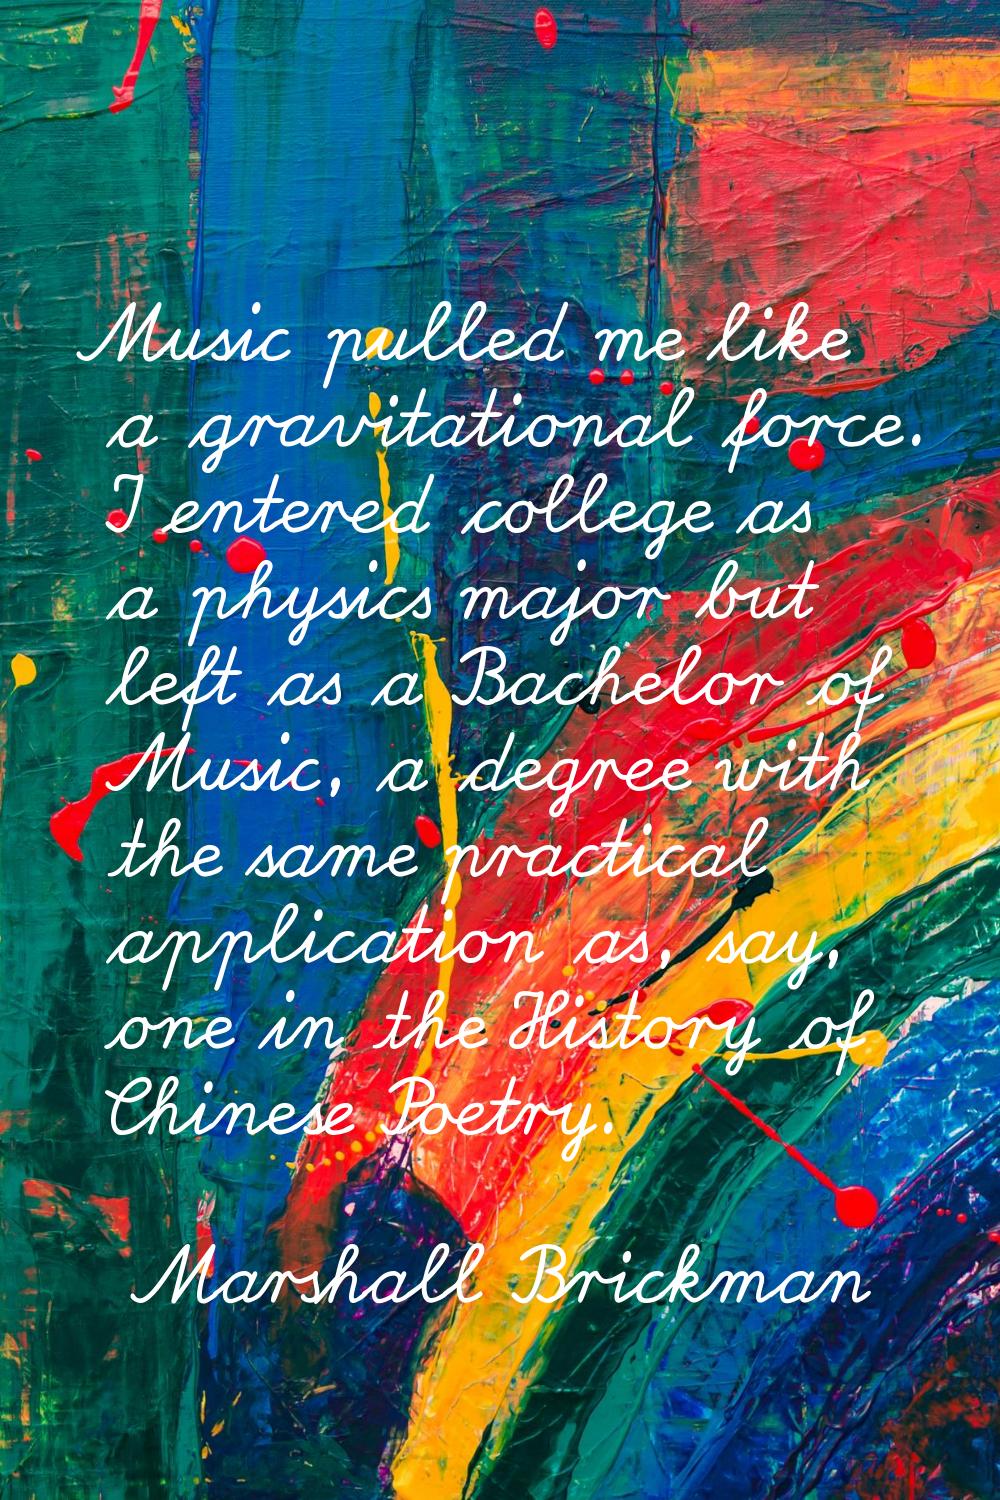 Music pulled me like a gravitational force. I entered college as a physics major but left as a Bach